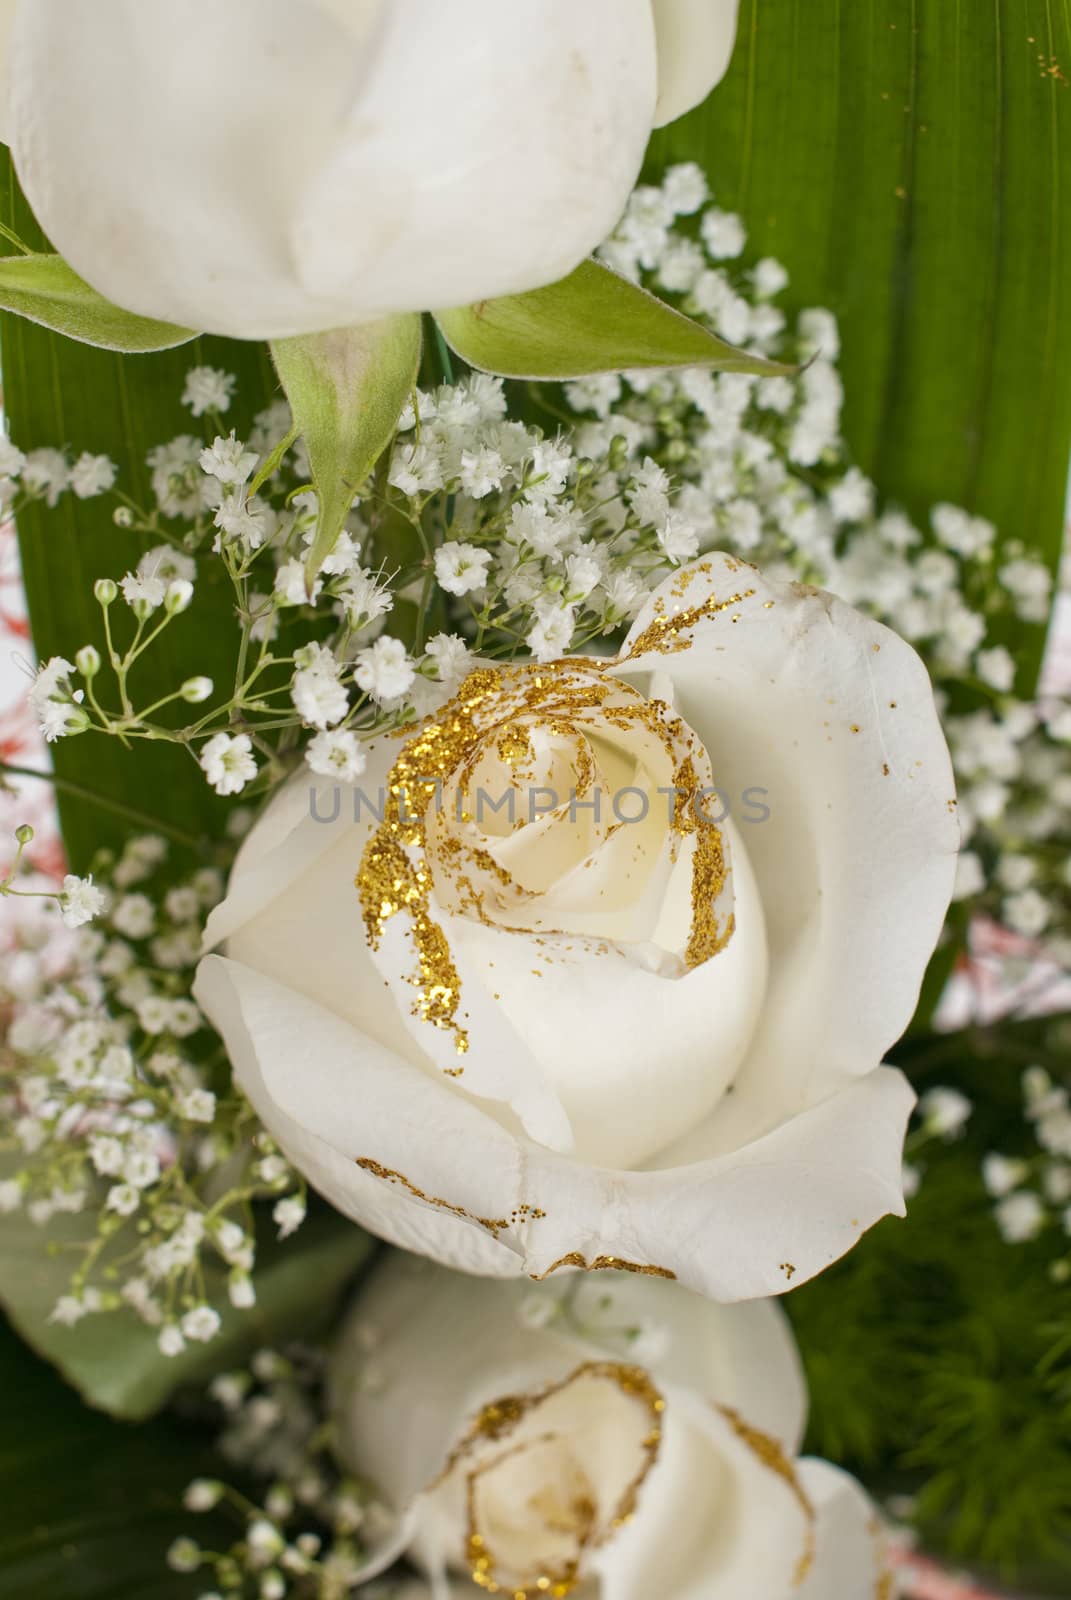 White roses bouquet close-up.